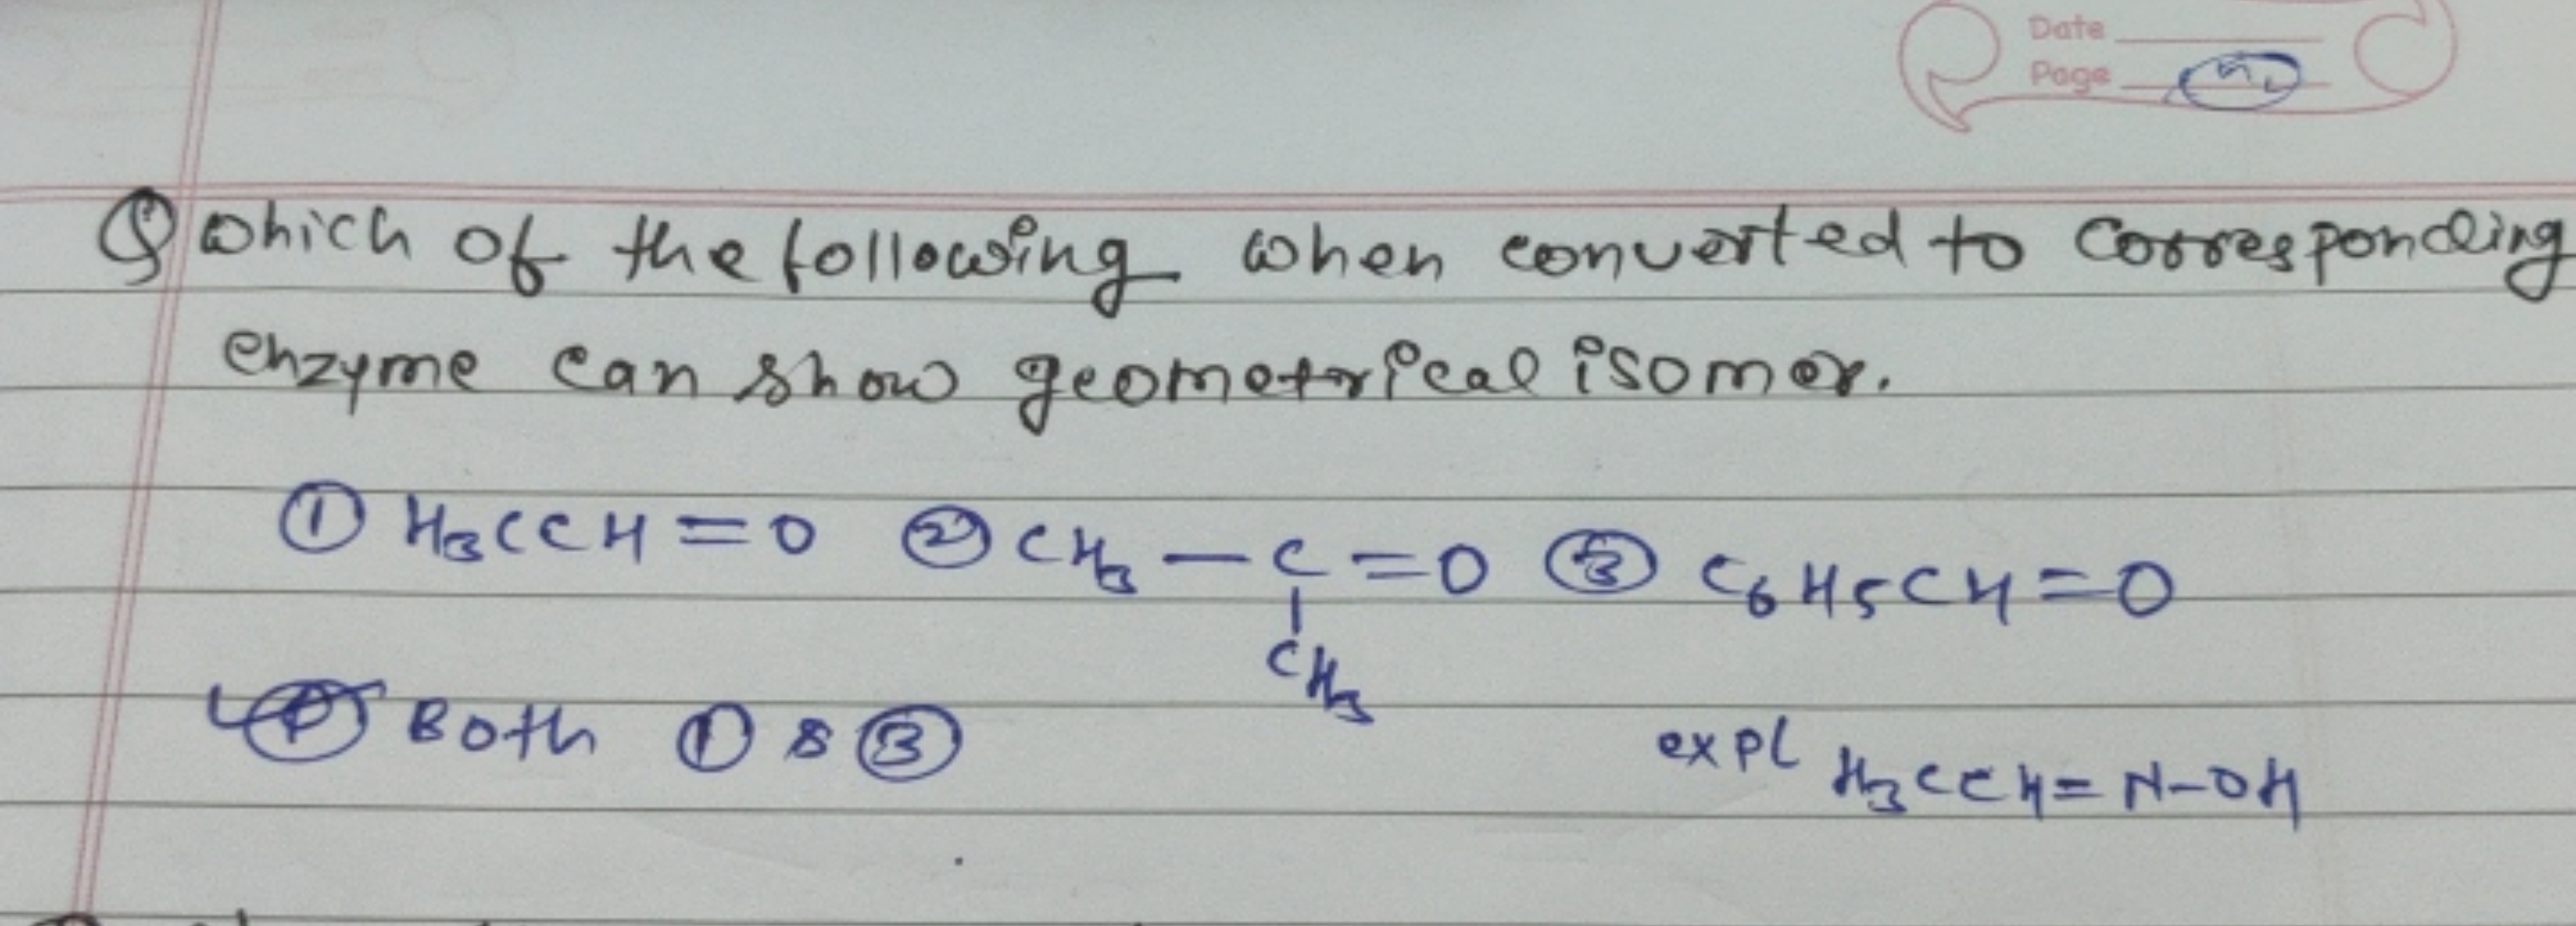 Q Which of the following when convarted to corresponding enzyme can sh